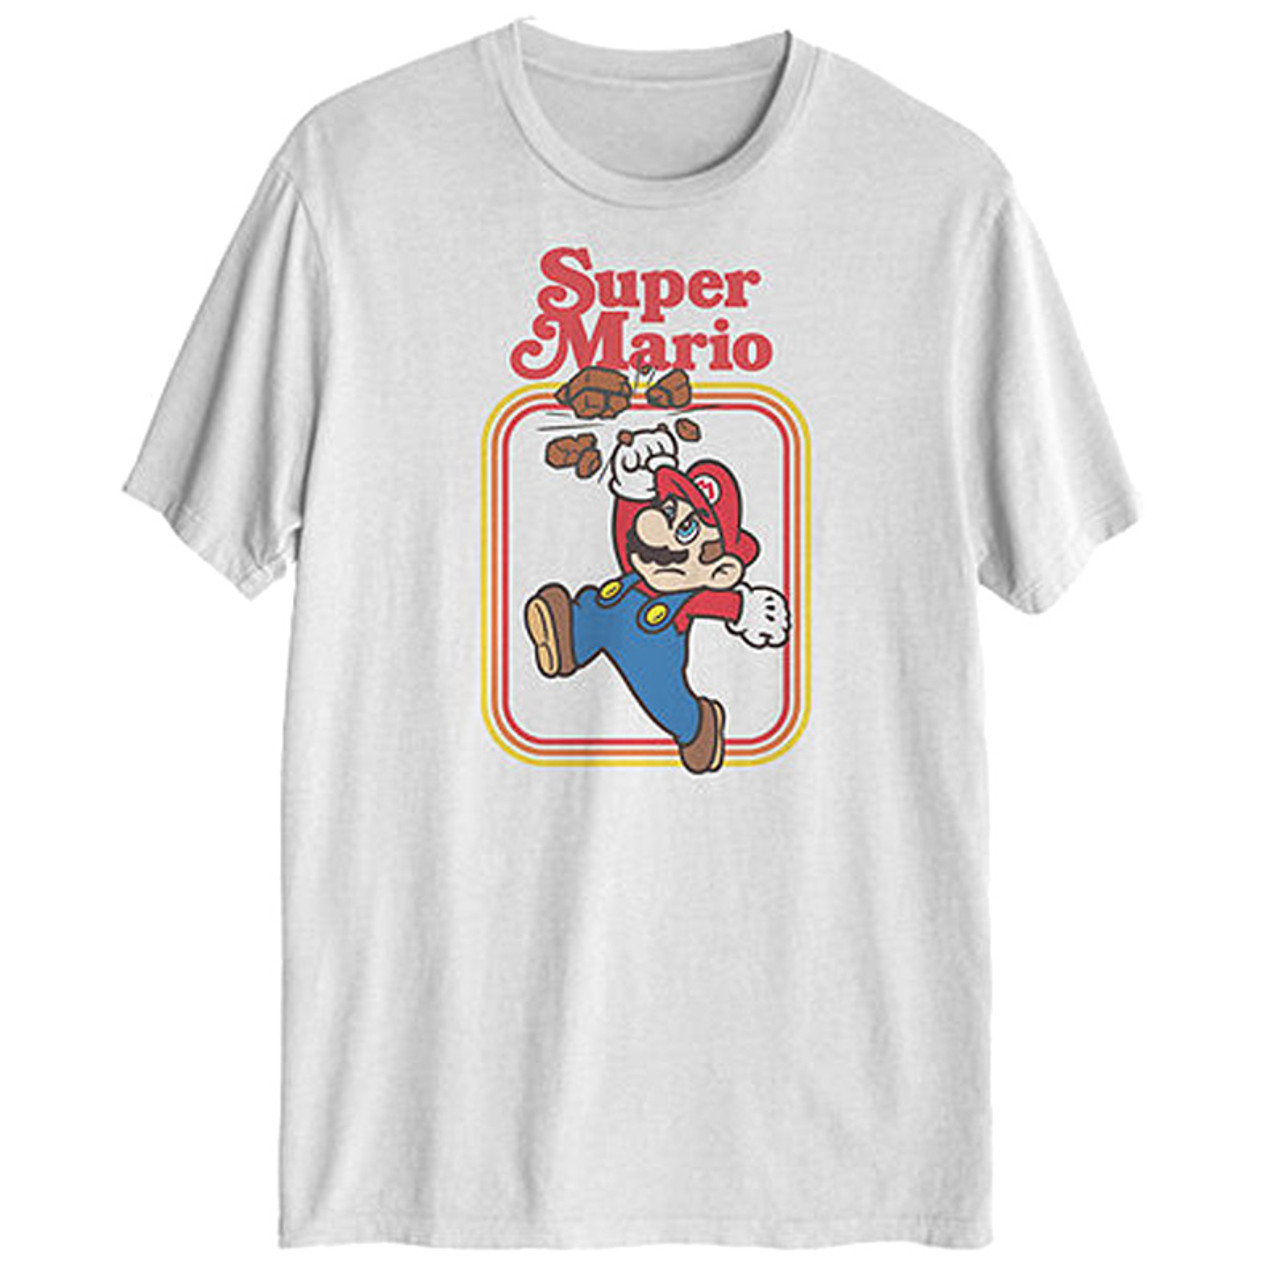 Super Mario White - Officially Licensed T-Shirt For Sale | DKOldies